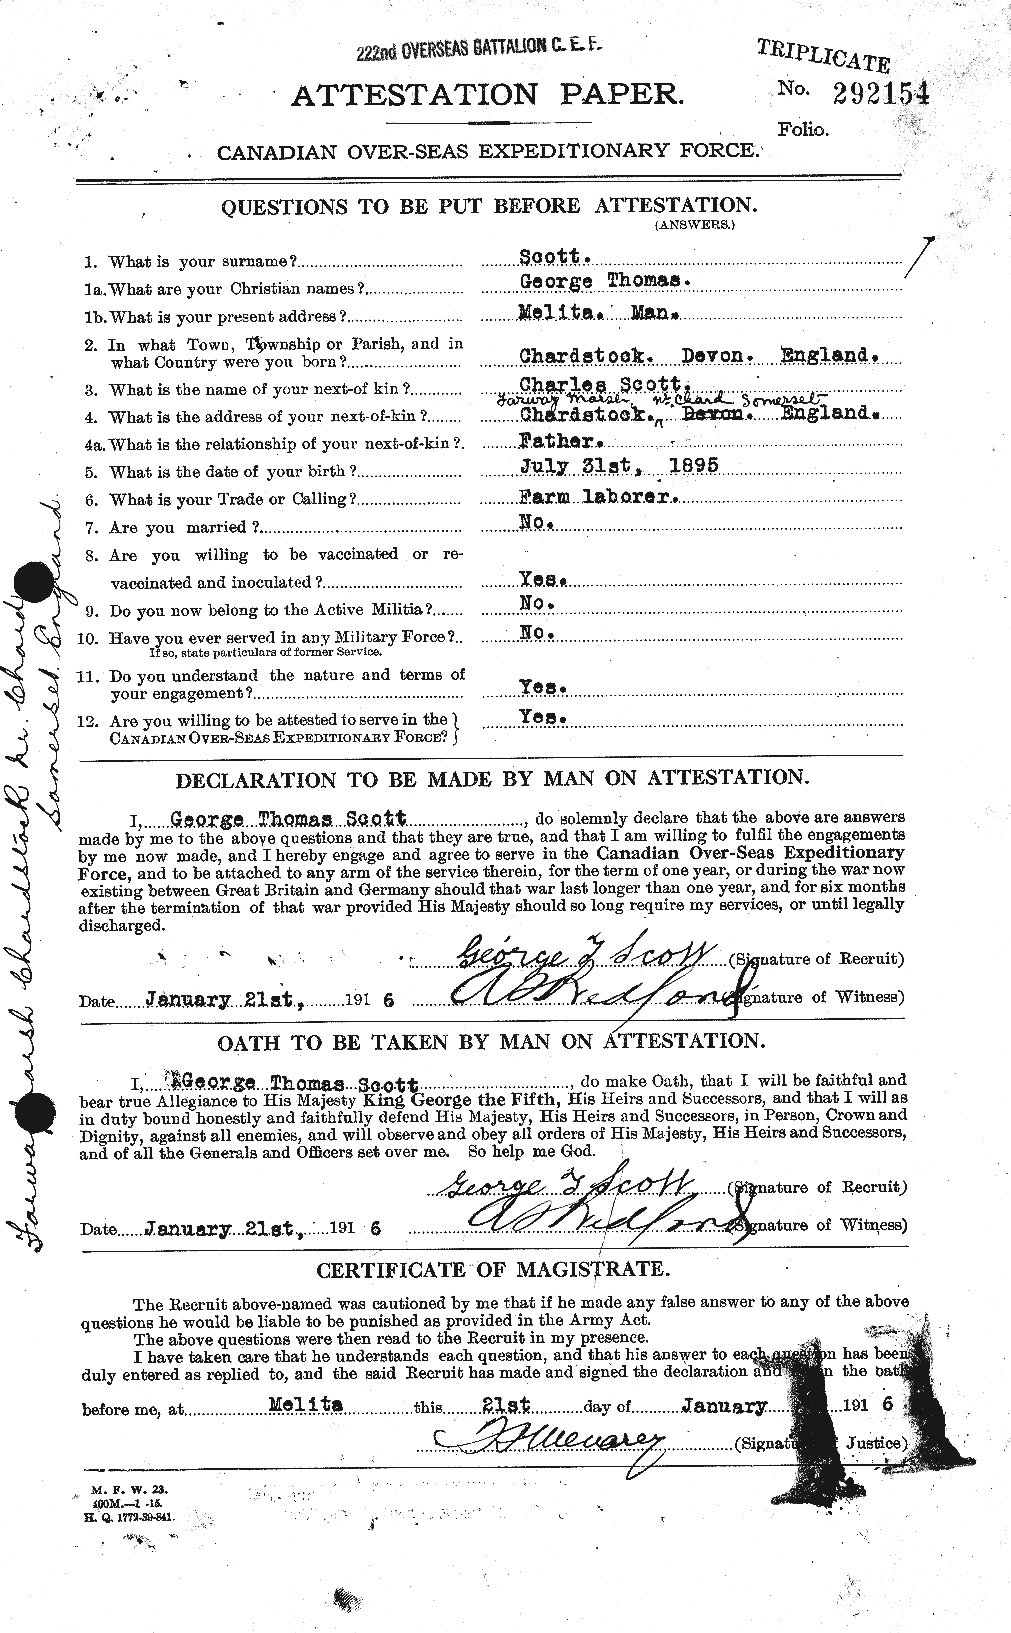 Personnel Records of the First World War - CEF 083141a